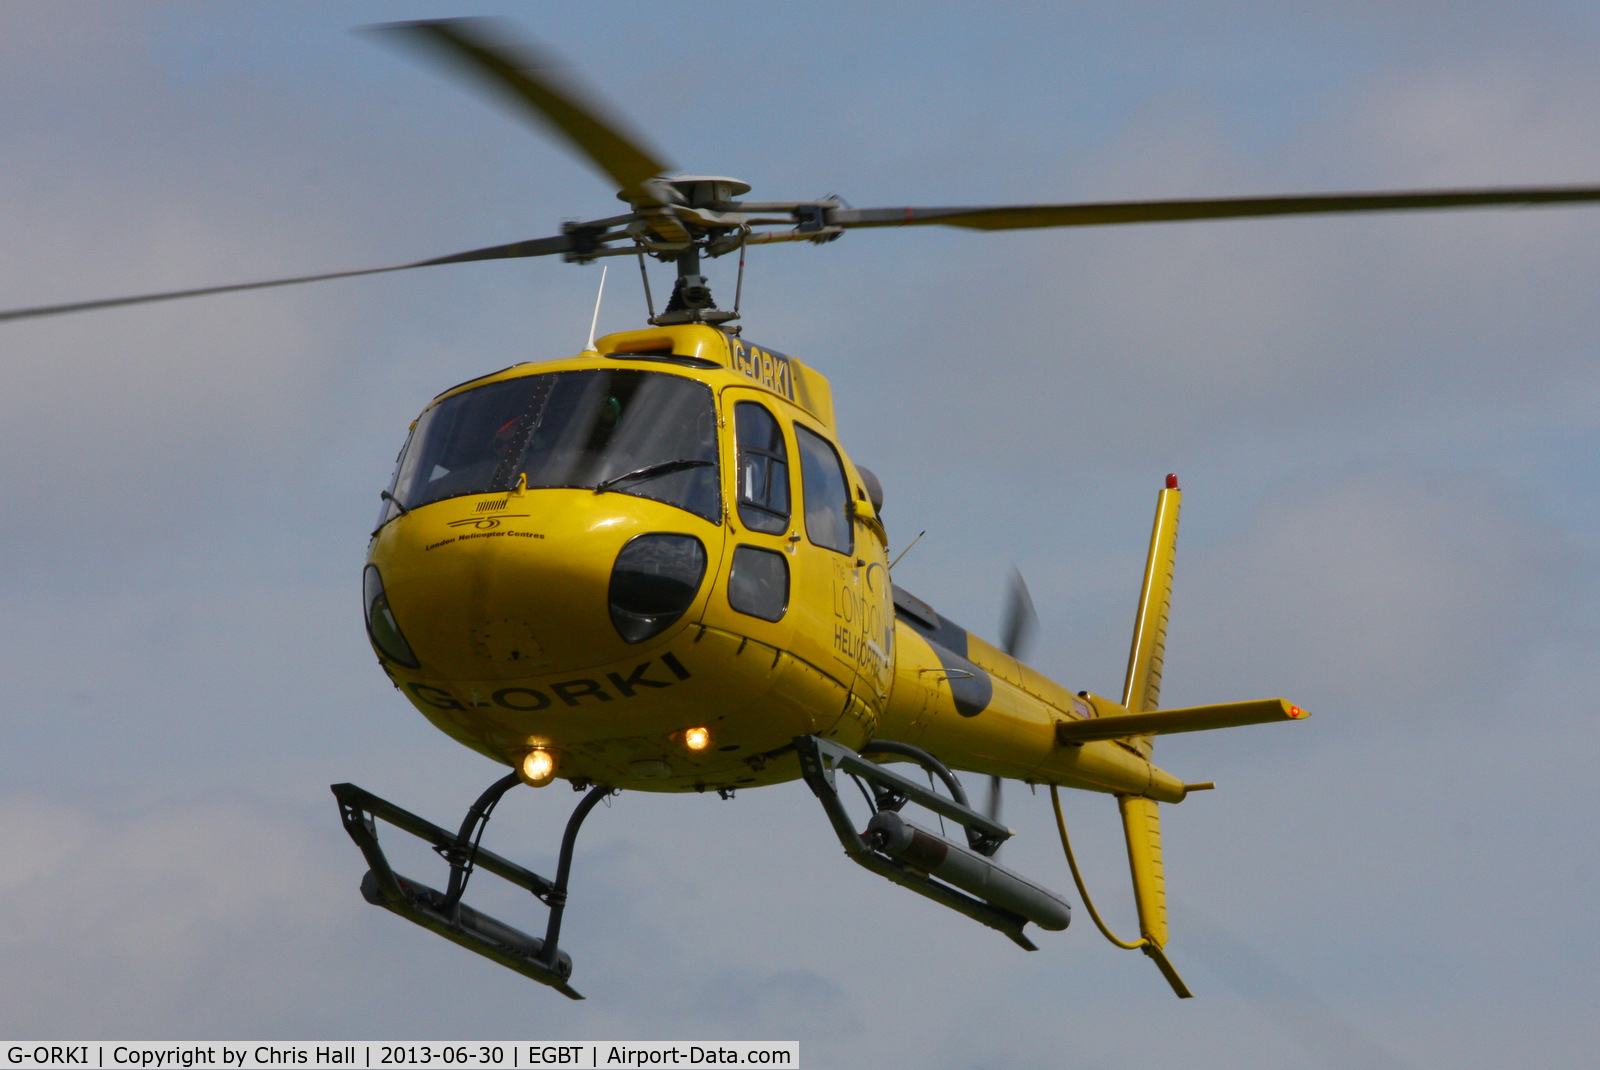 G-ORKI, 2002 Eurocopter AS-350B-3 Ecureuil Ecureuil C/N 3587, being used for ferrying race fans to the British F1 Grand Prix at Silverstone